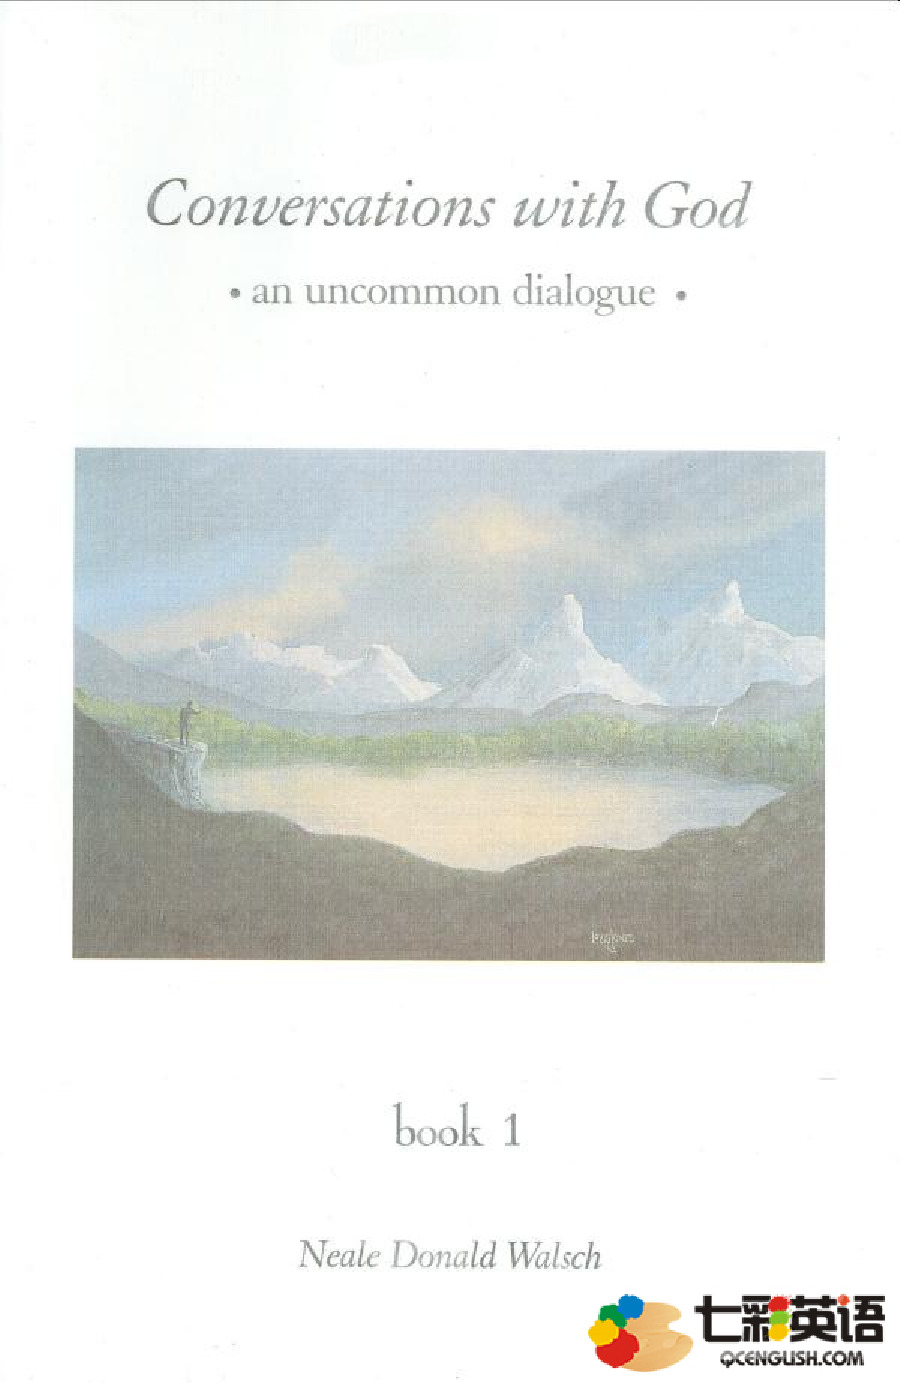 Conversations with God An Uncommon Dialogue (Book 1) – Neale Donald Walsch